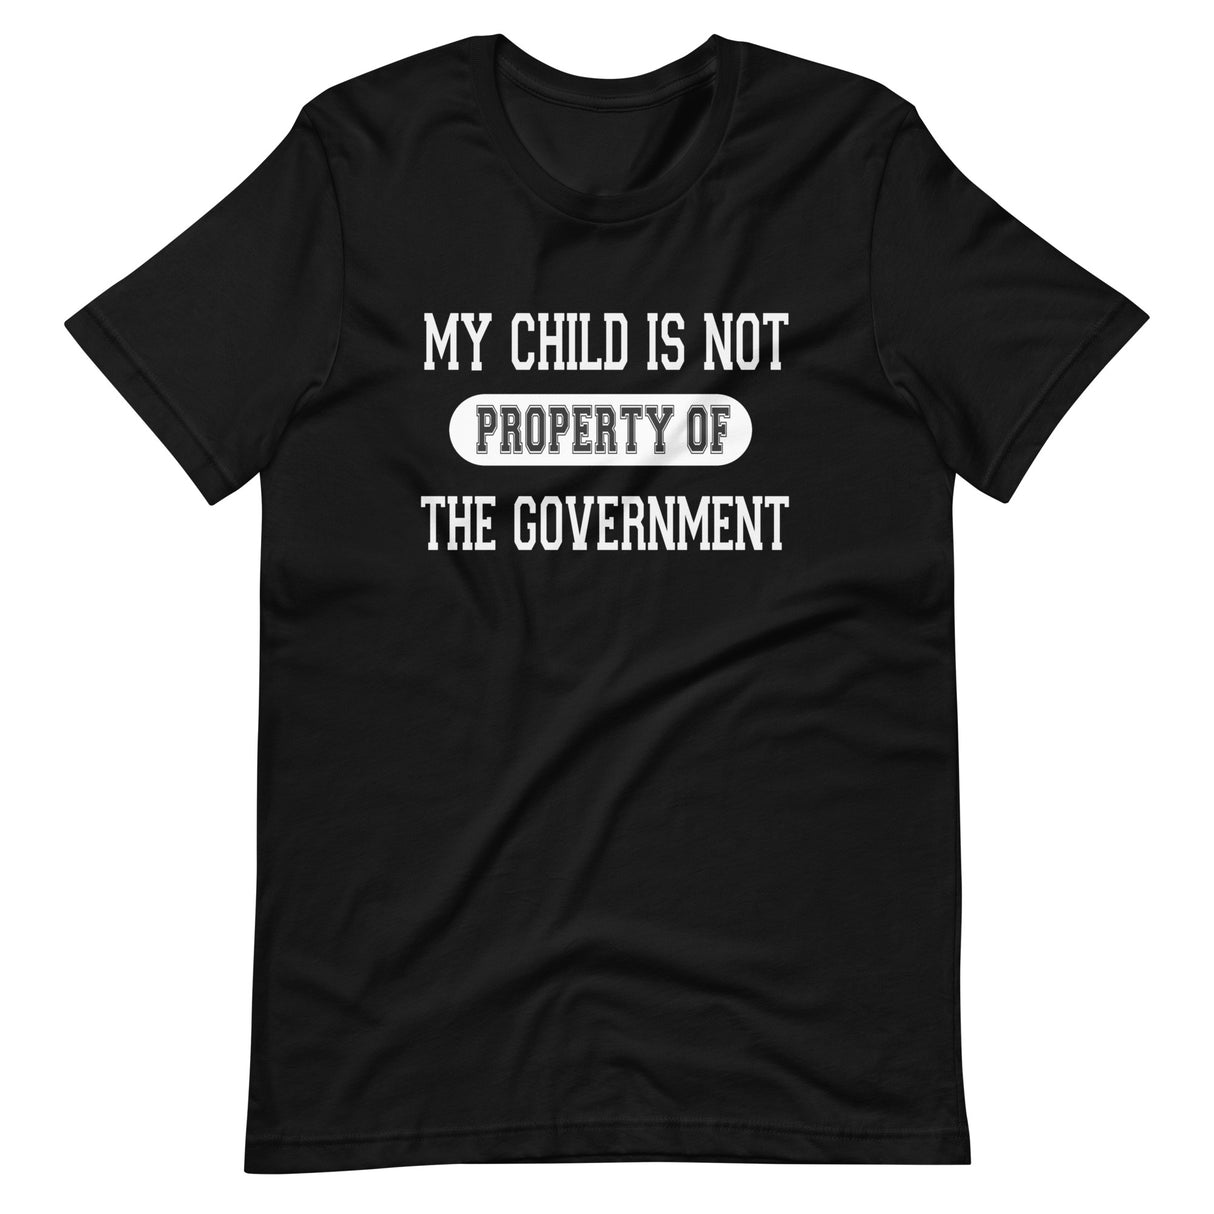 My Child is Not Property of The Government Shirt